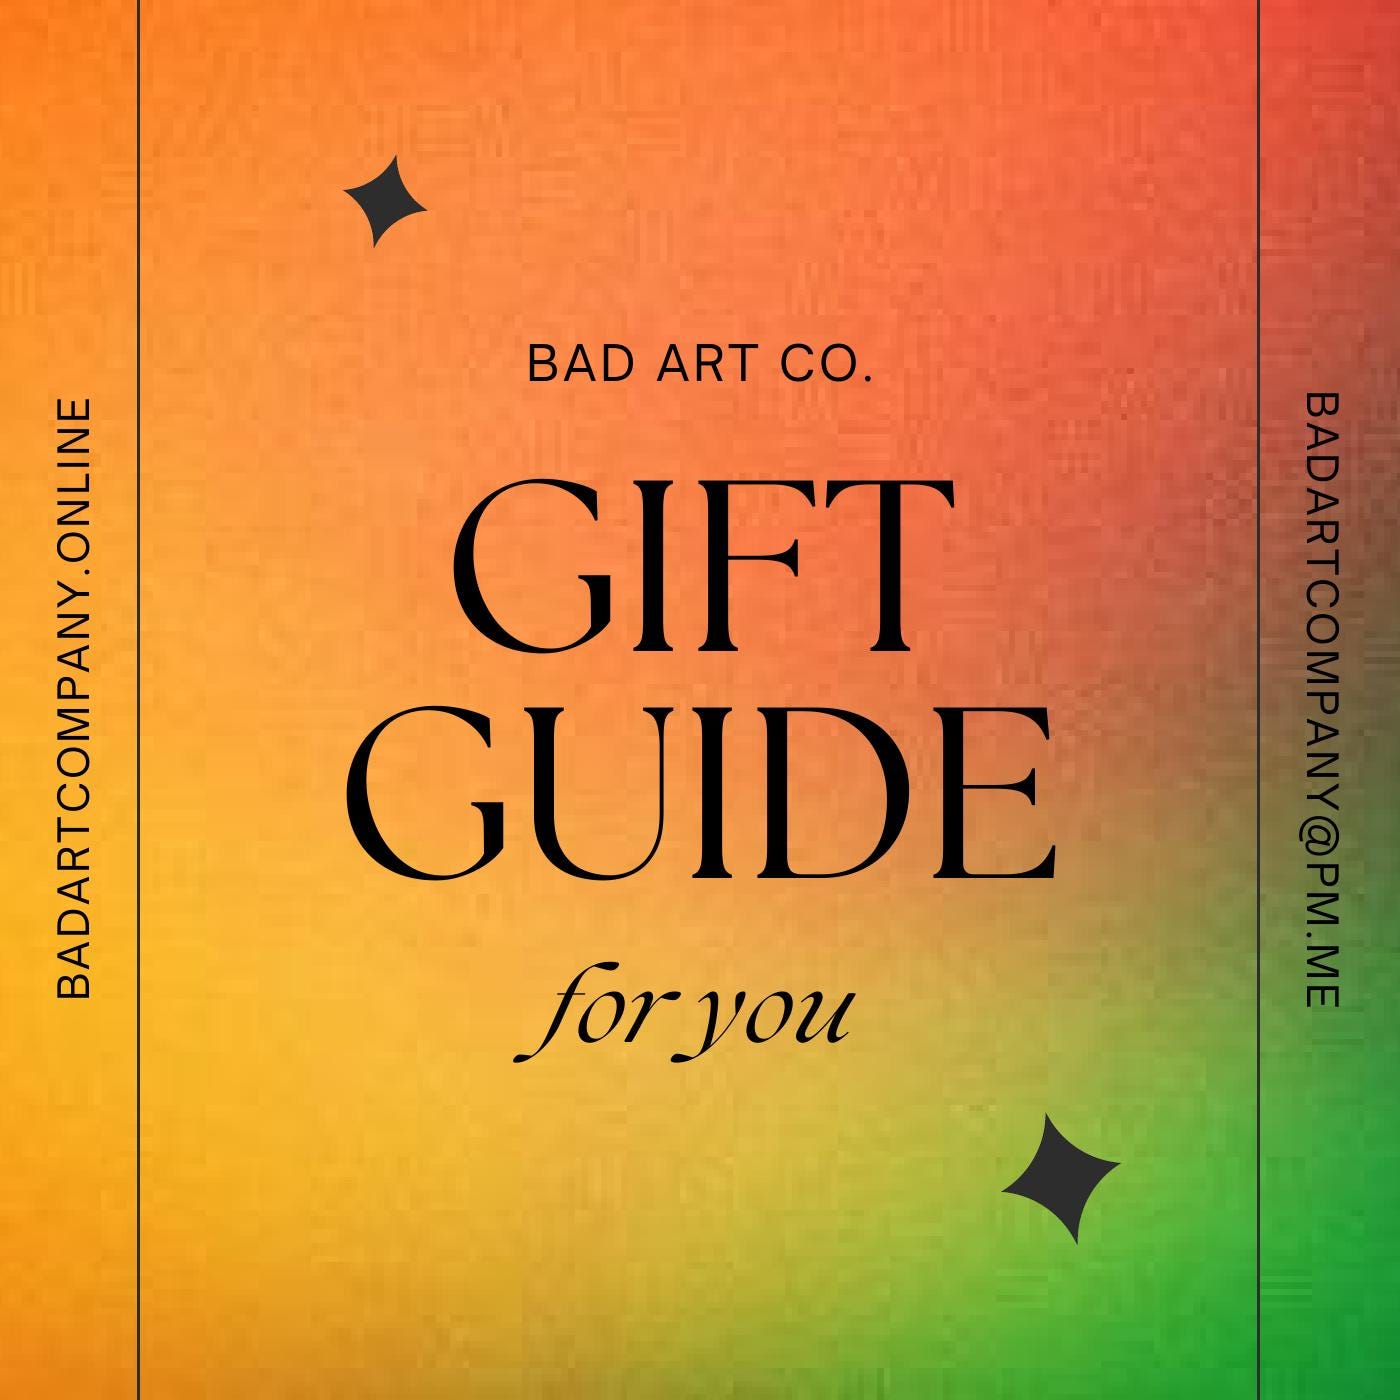 Cover of the Bad Art Co. Gift Guide